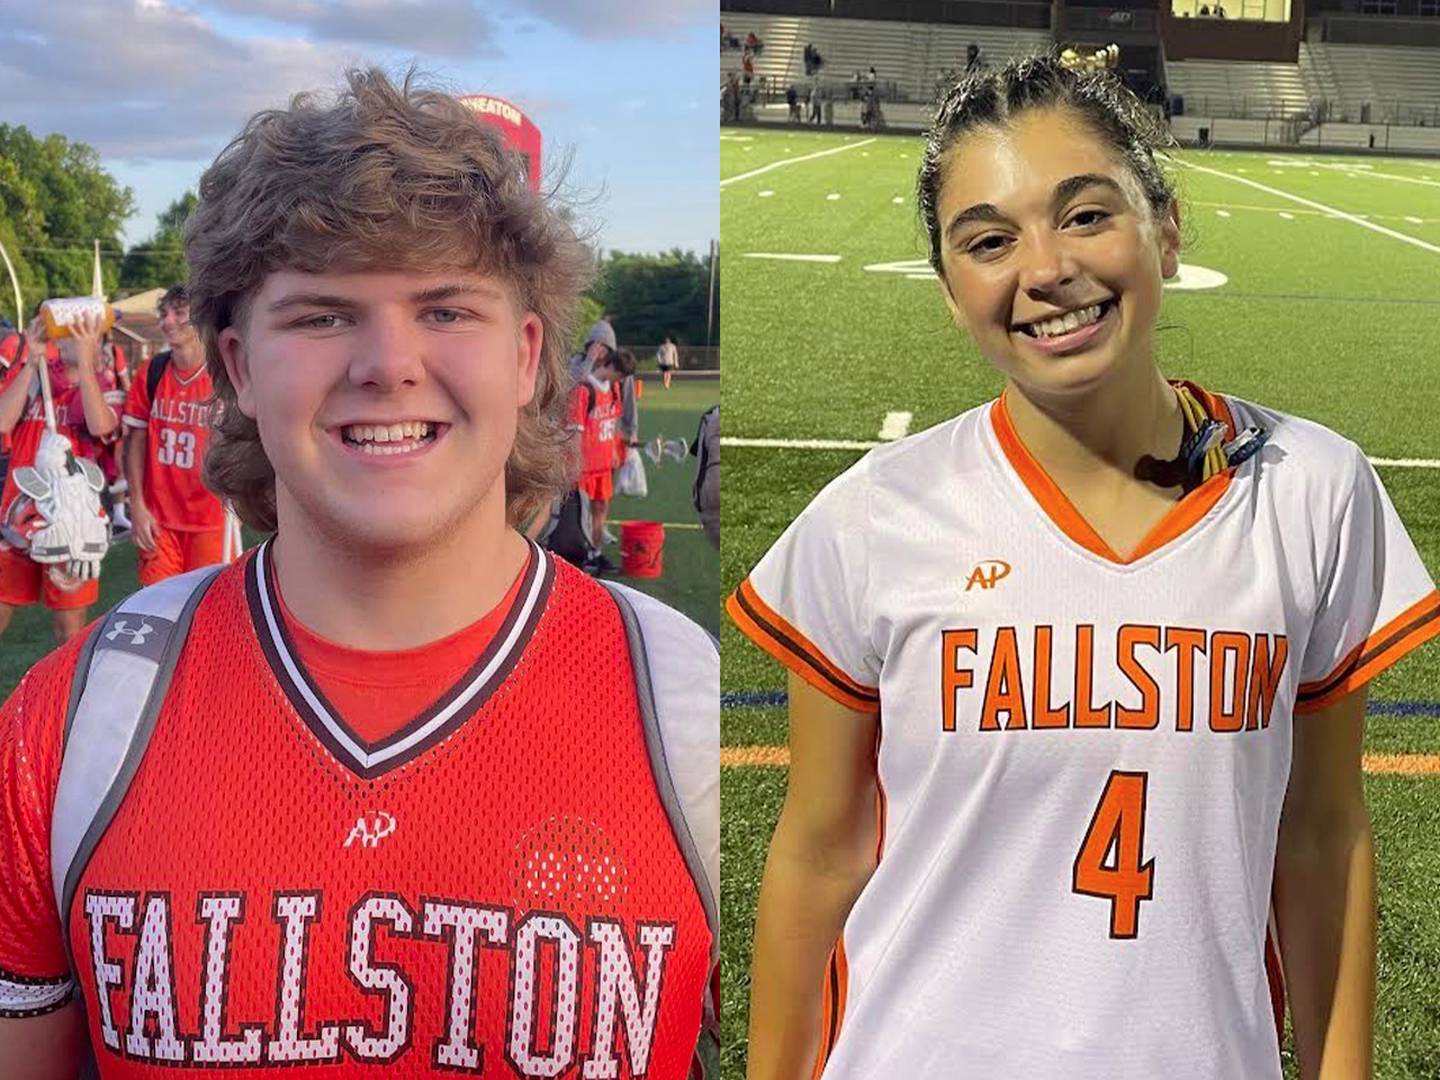 The Fallston boys and girls lacrosse teams each won their way into their respective Class 1A state championship games with wins over their counterparts from Smithsburg.